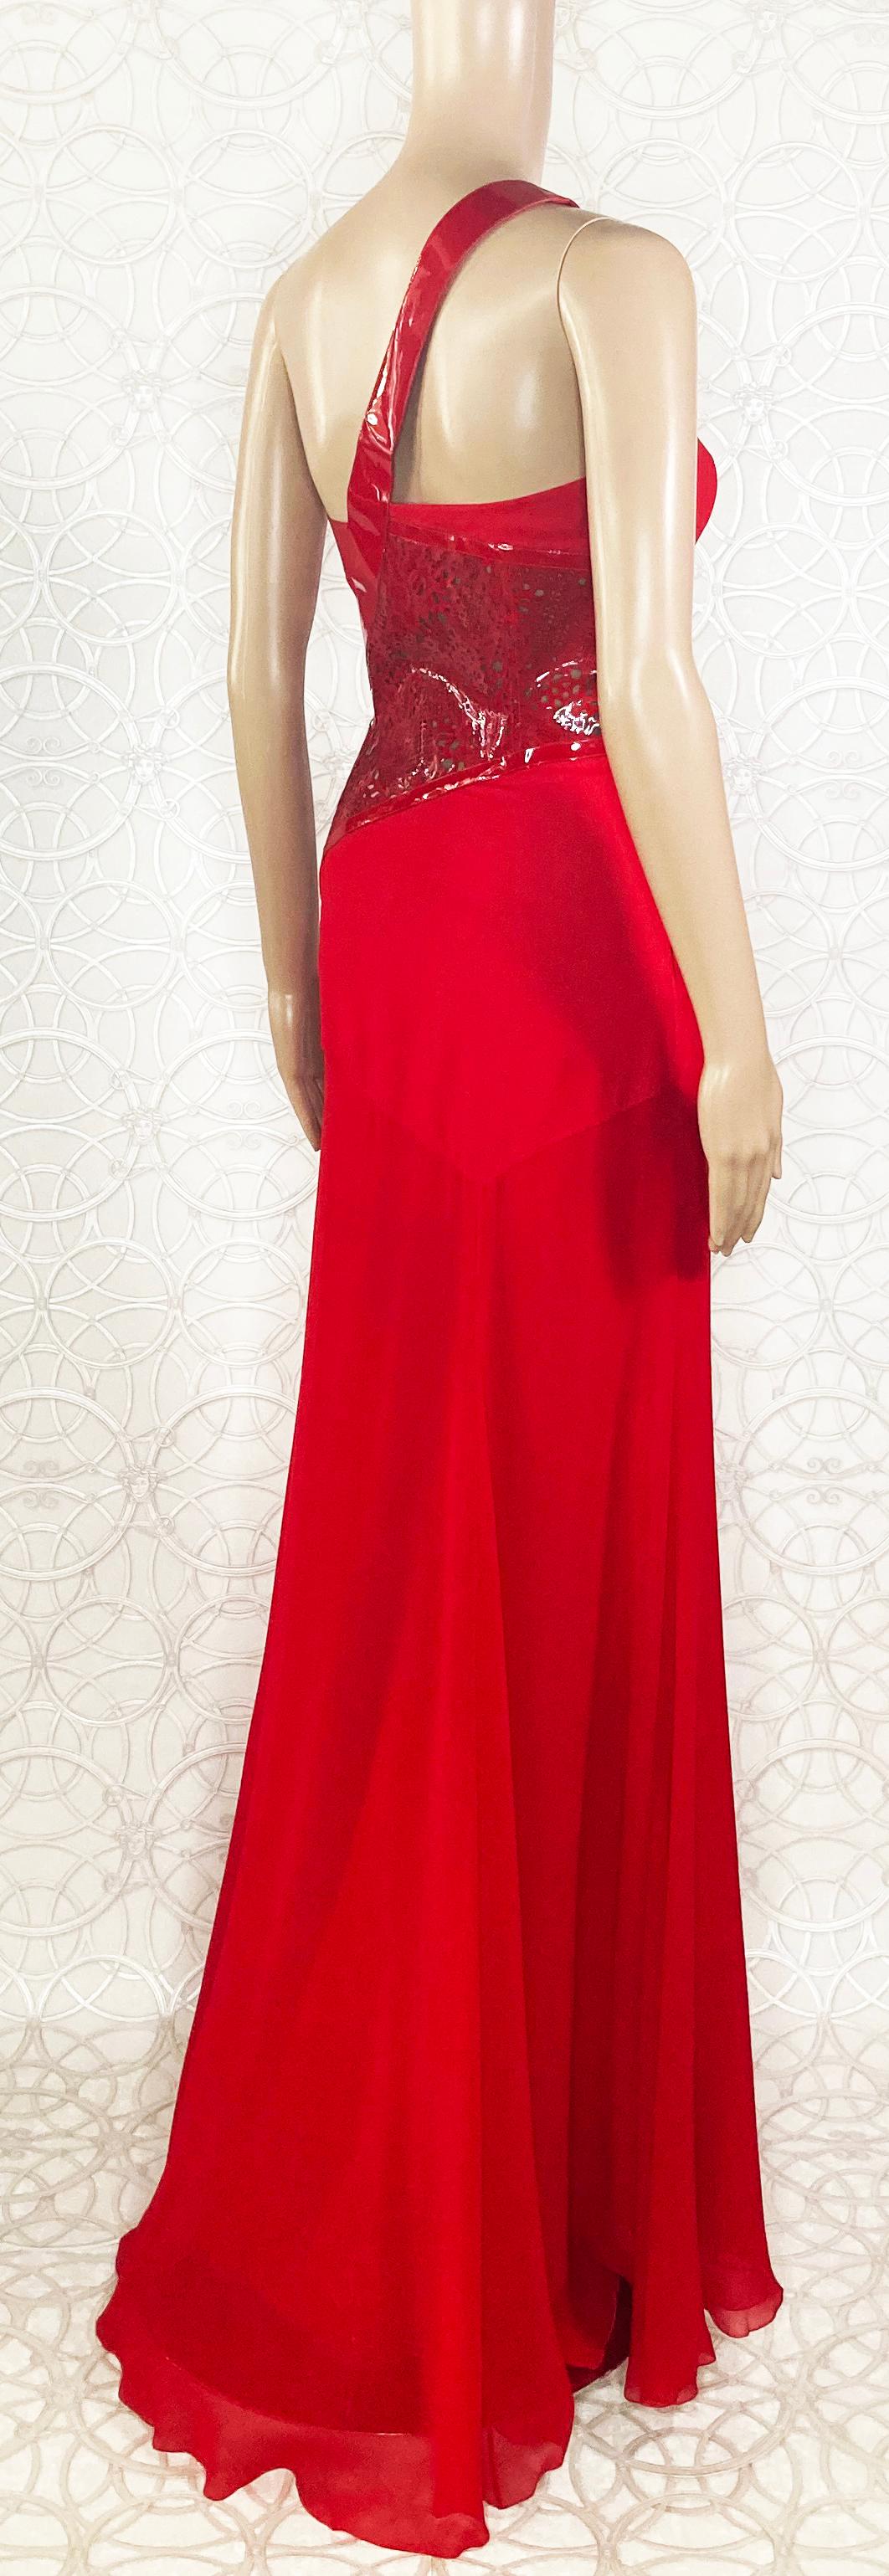 VERSACE RED SILK EVENING LONG GOWN DRESS w/PATENT LEATHER INSERTS 38 -2 For Sale 7